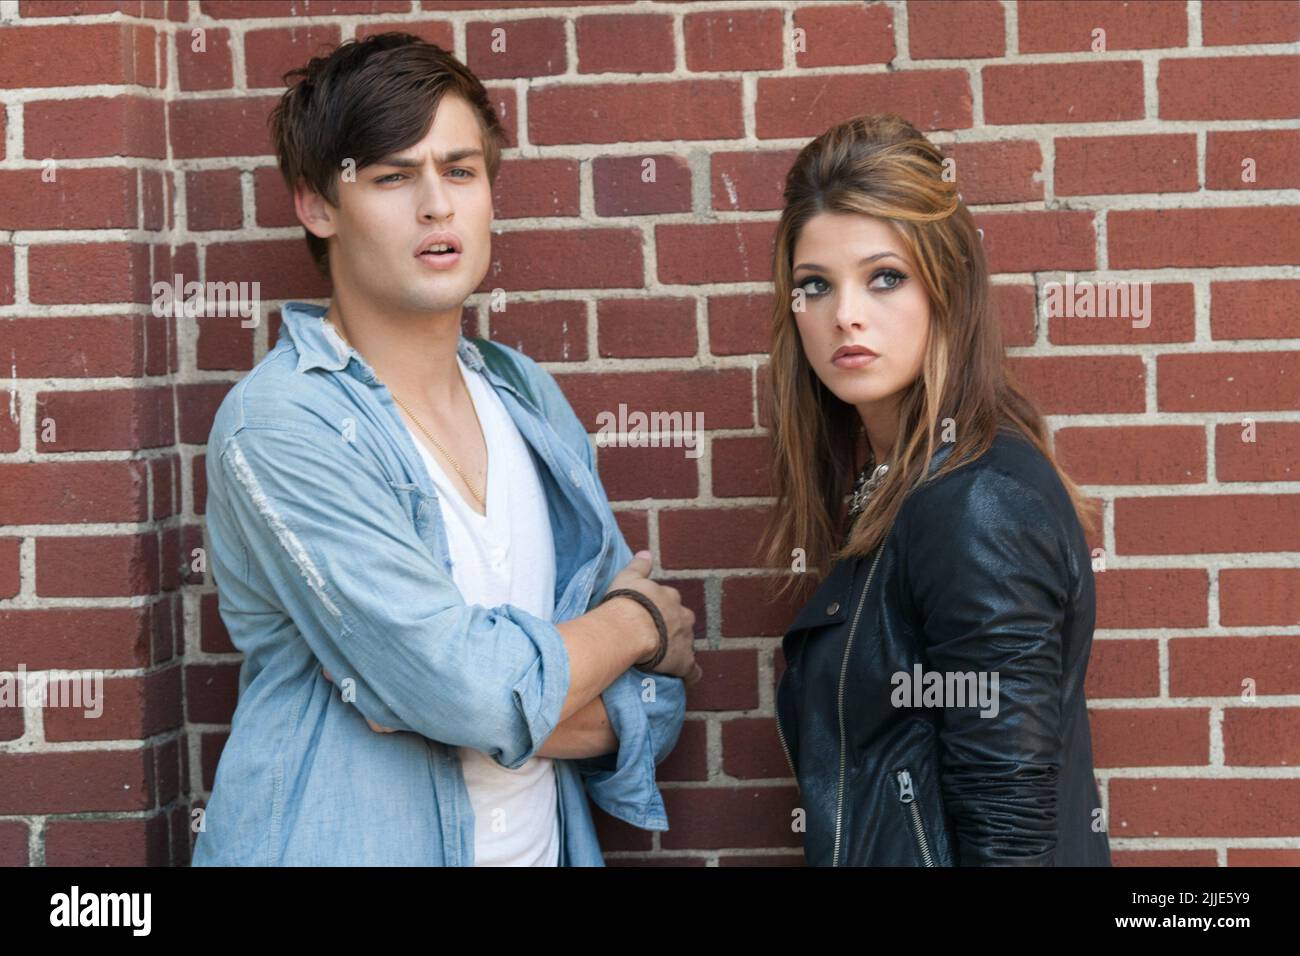 DOUGLAS BOOTH, ASHLEY GREENE, LOL, 2012 Banque D'Images